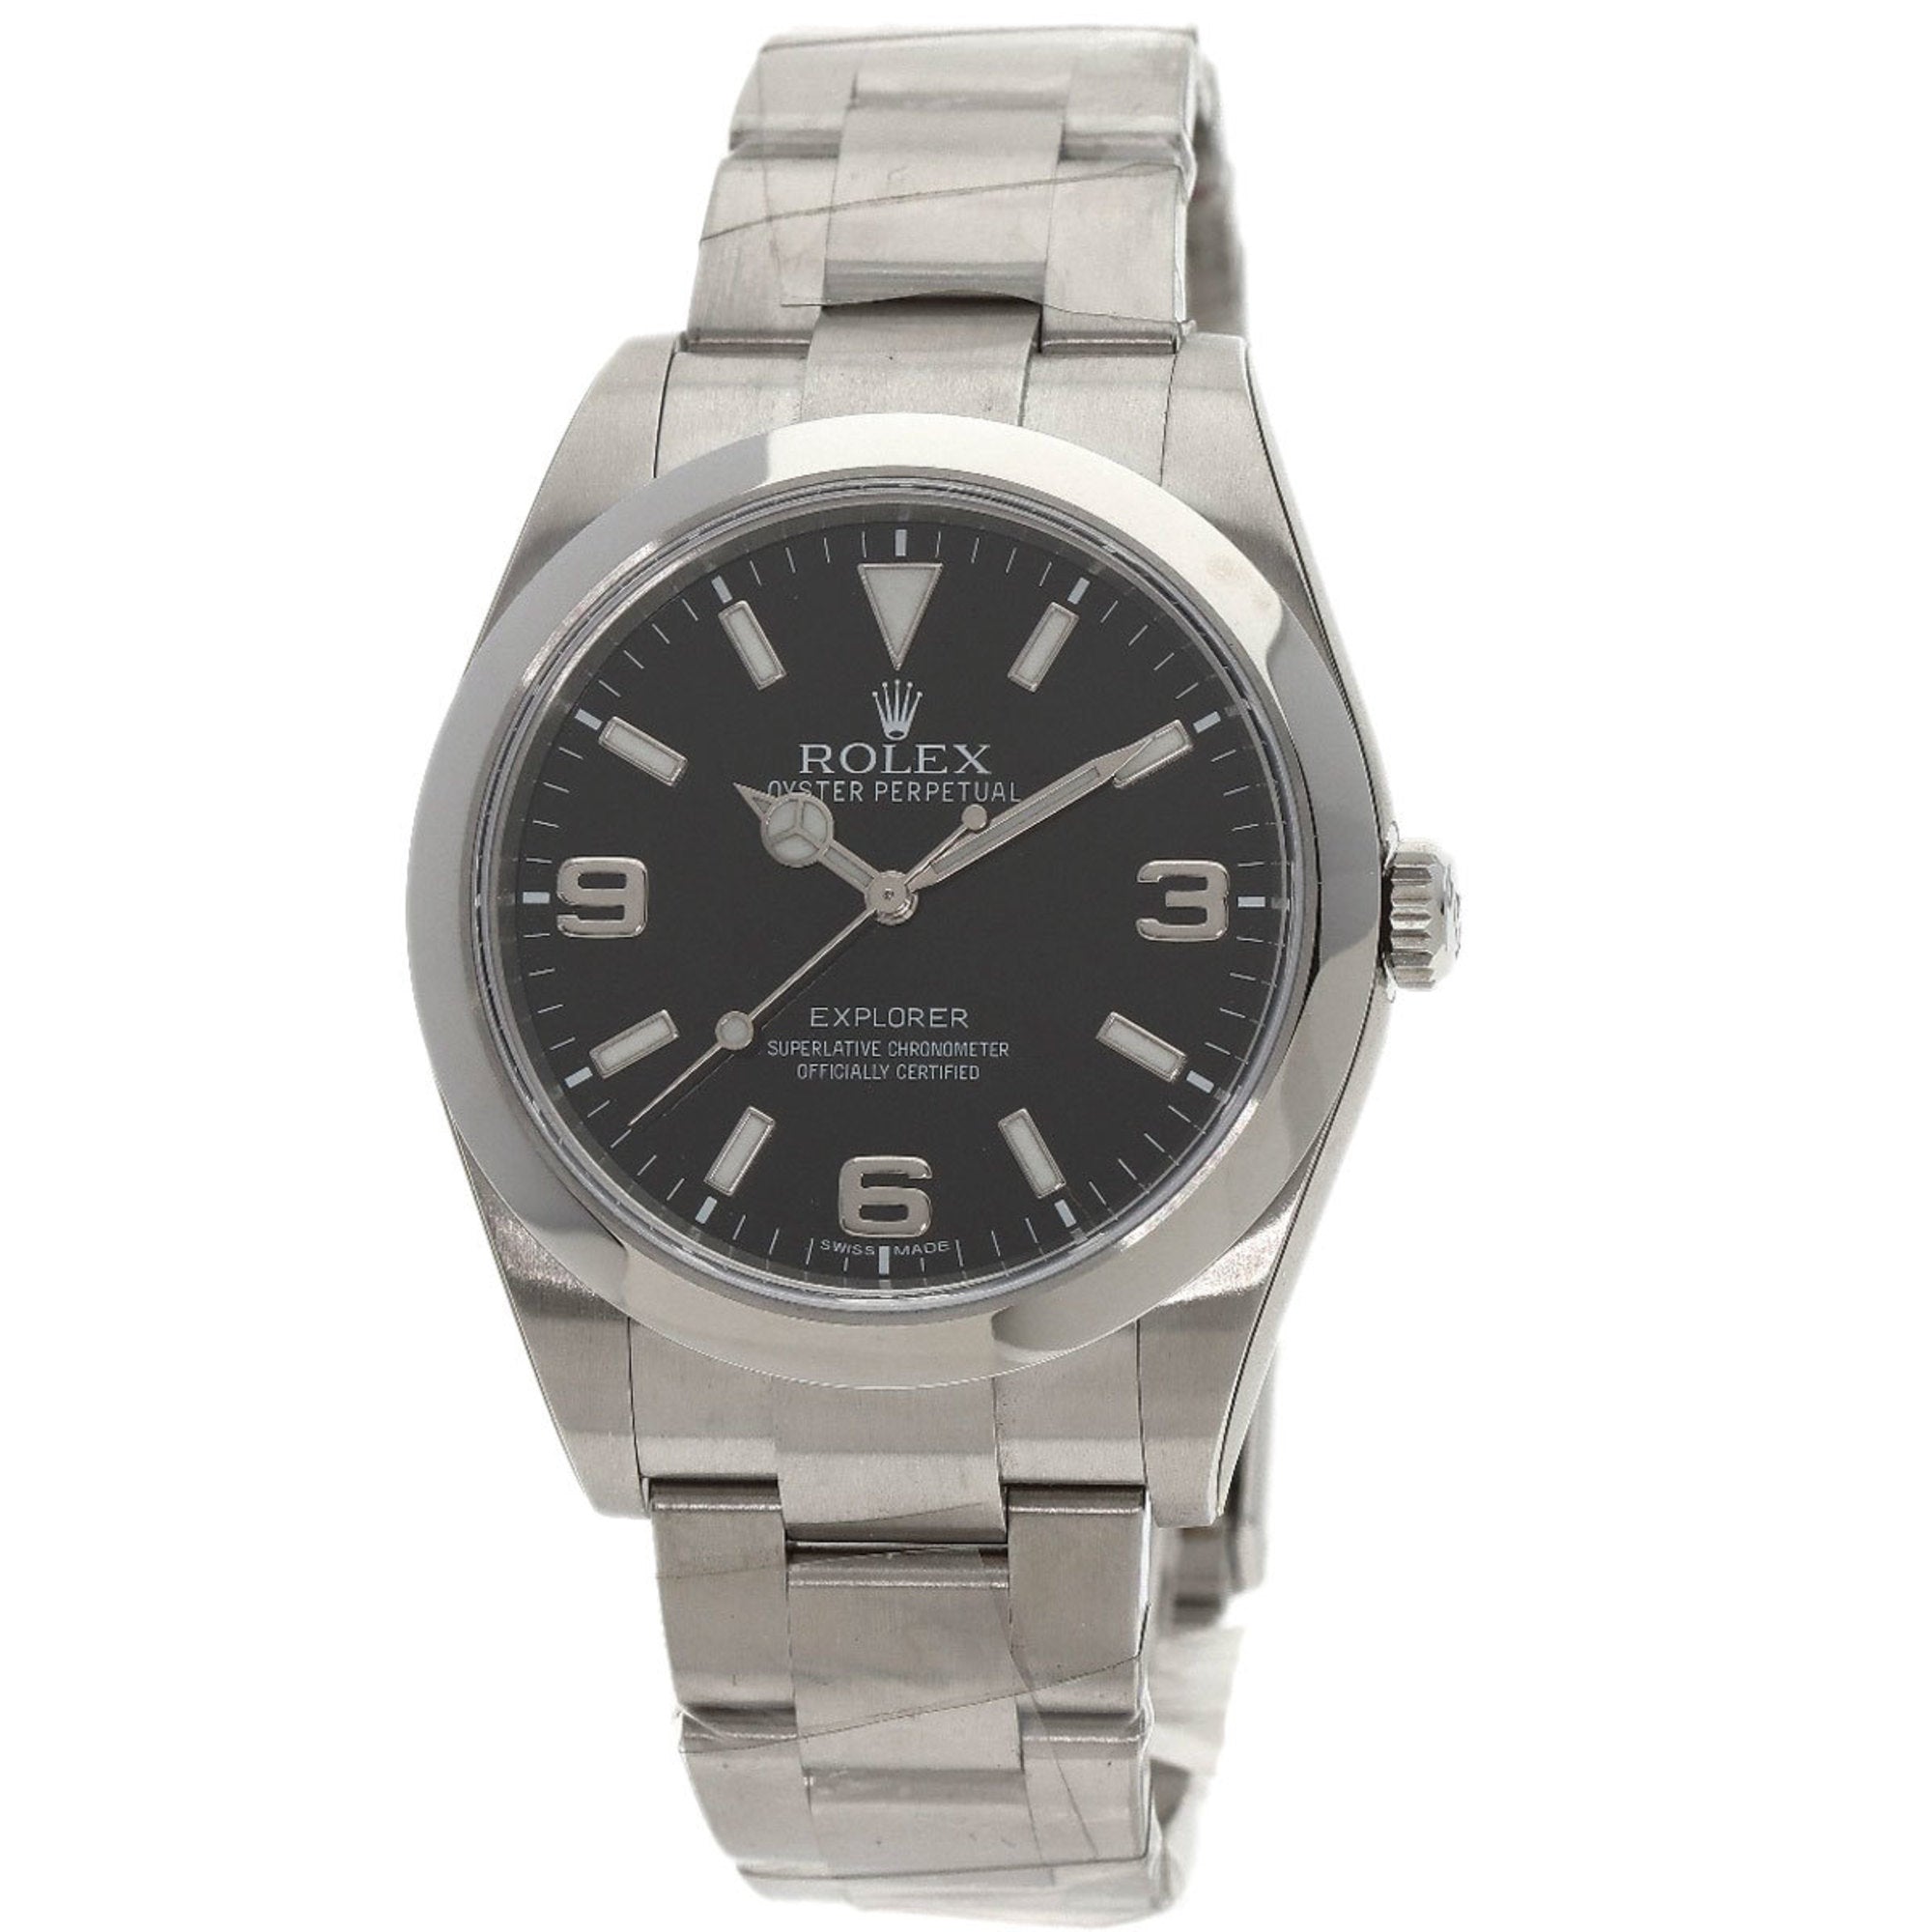 image of ROLEX 214270 Explorer 1 Item Sealed Watch Stainless Steel SS Men's